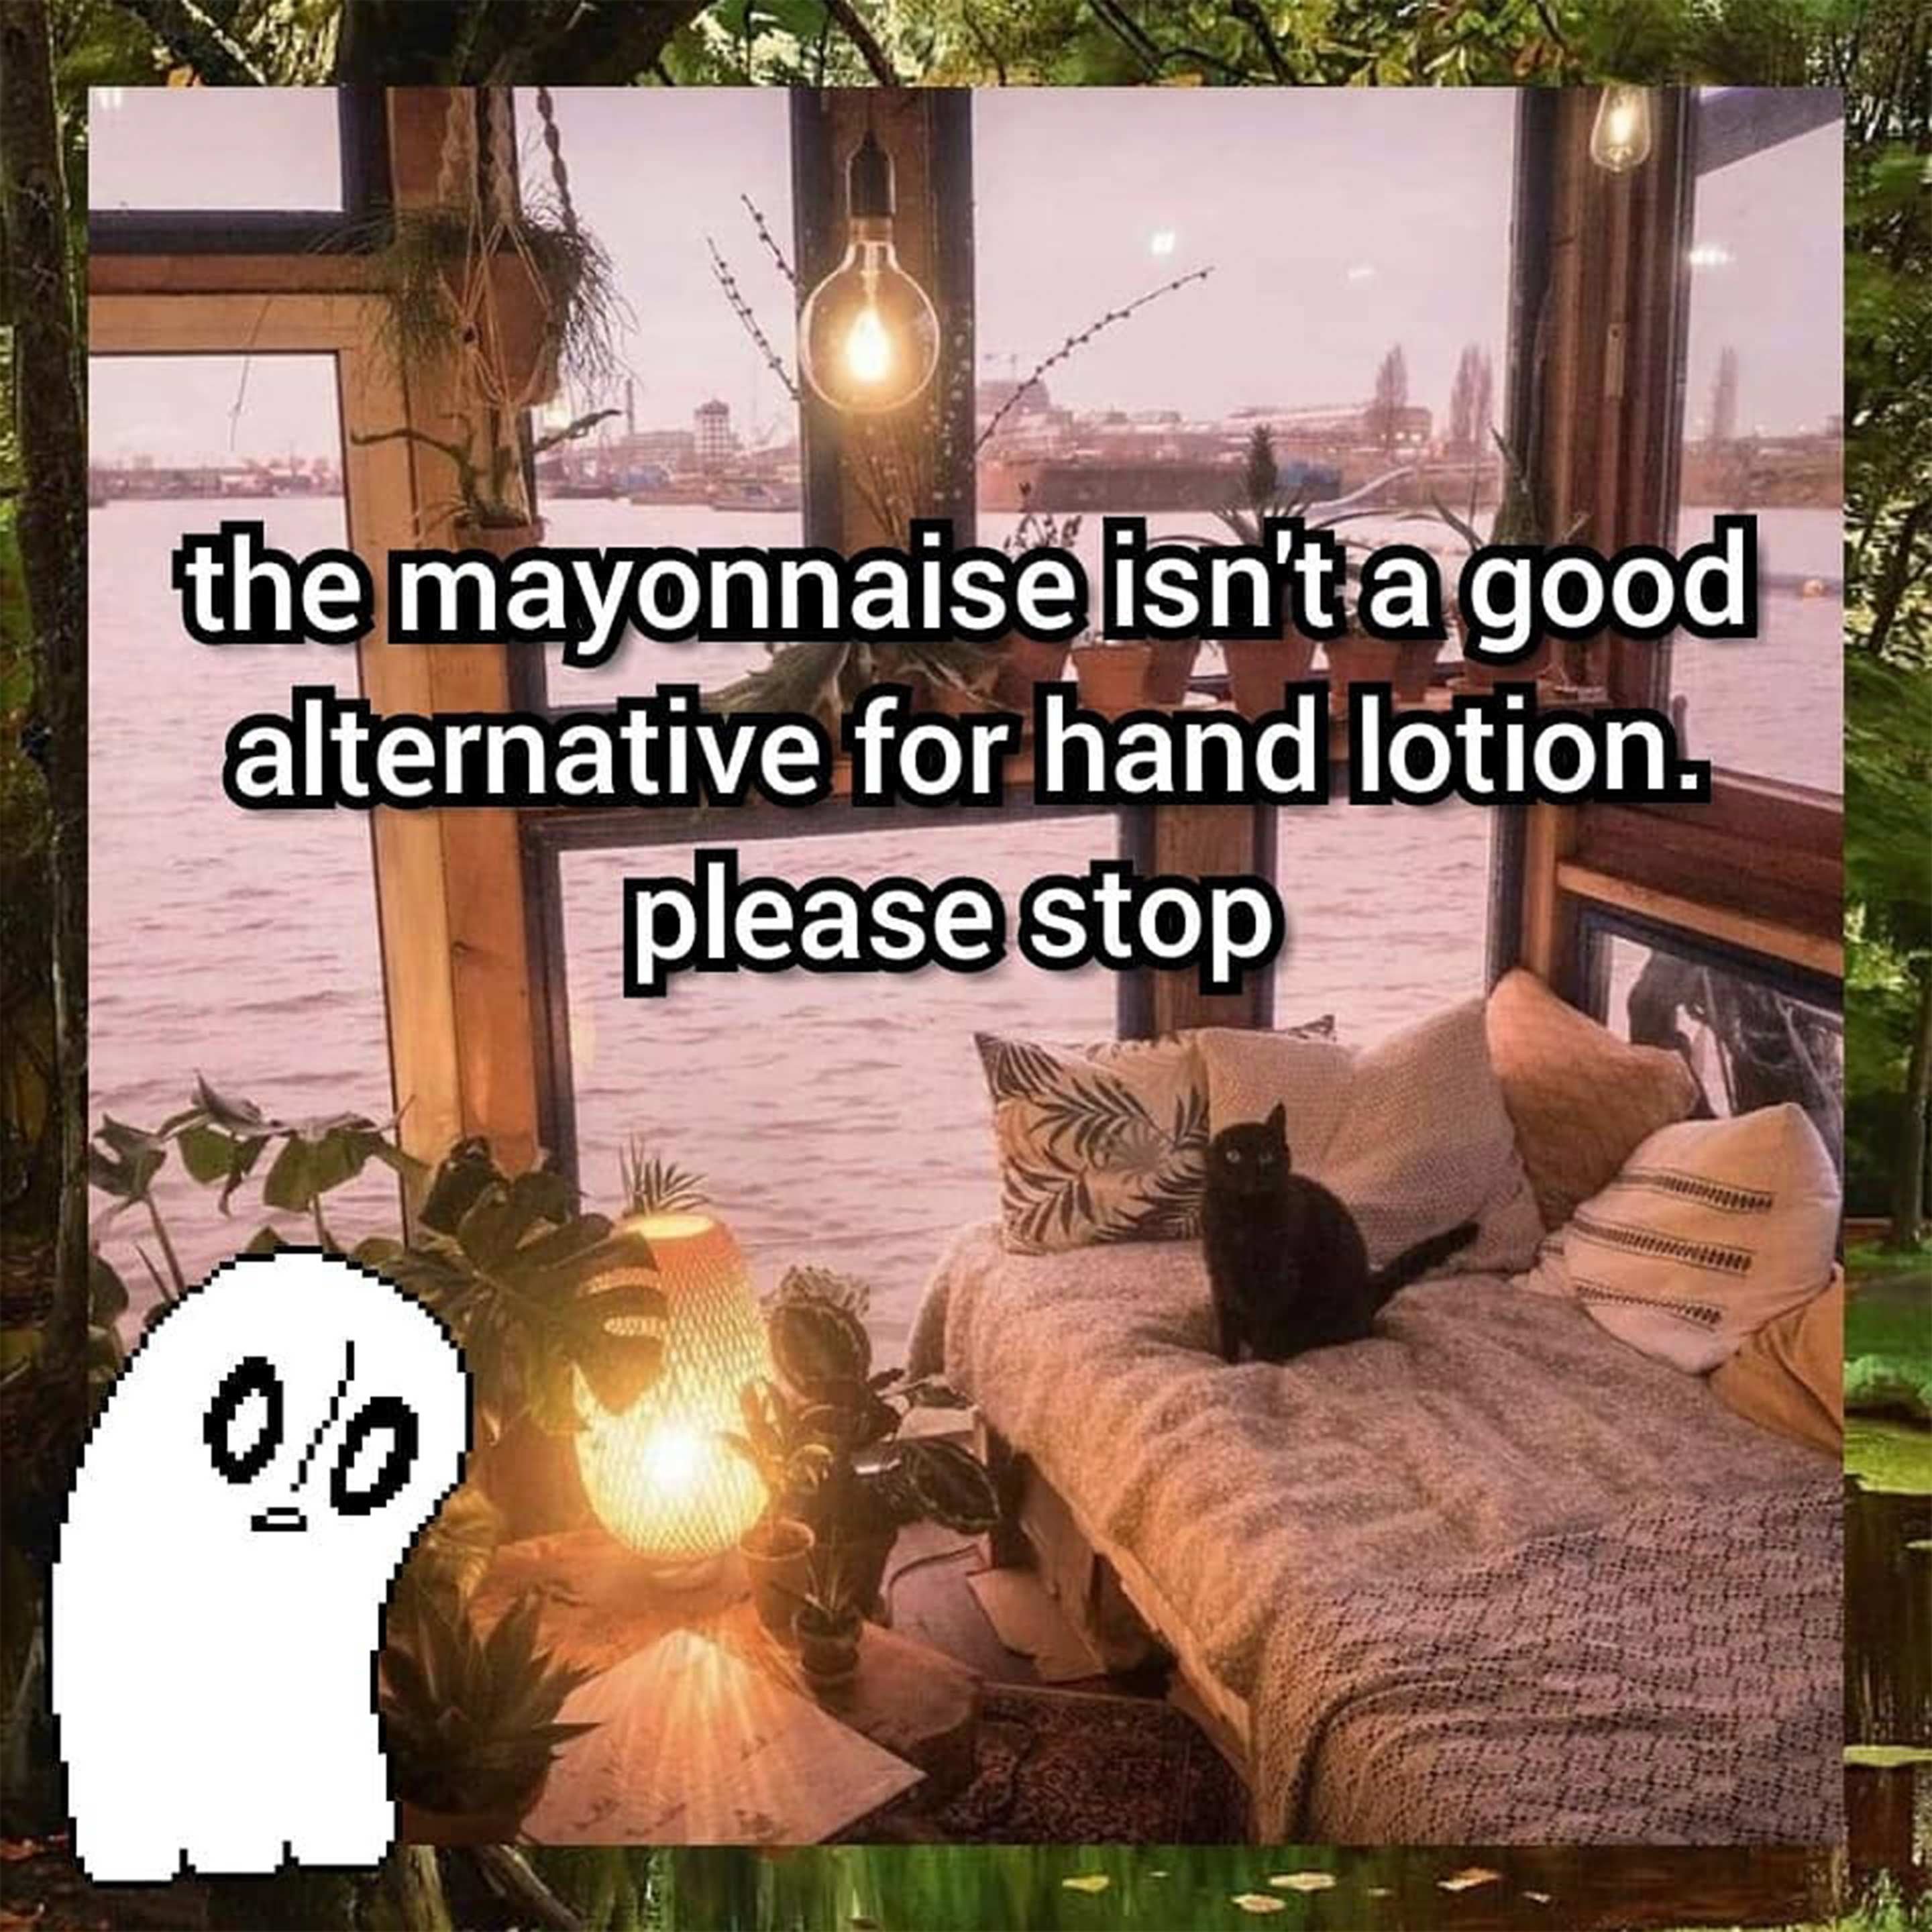 The mayonnaise isn't a good alternative for hand lotion. Please stop.